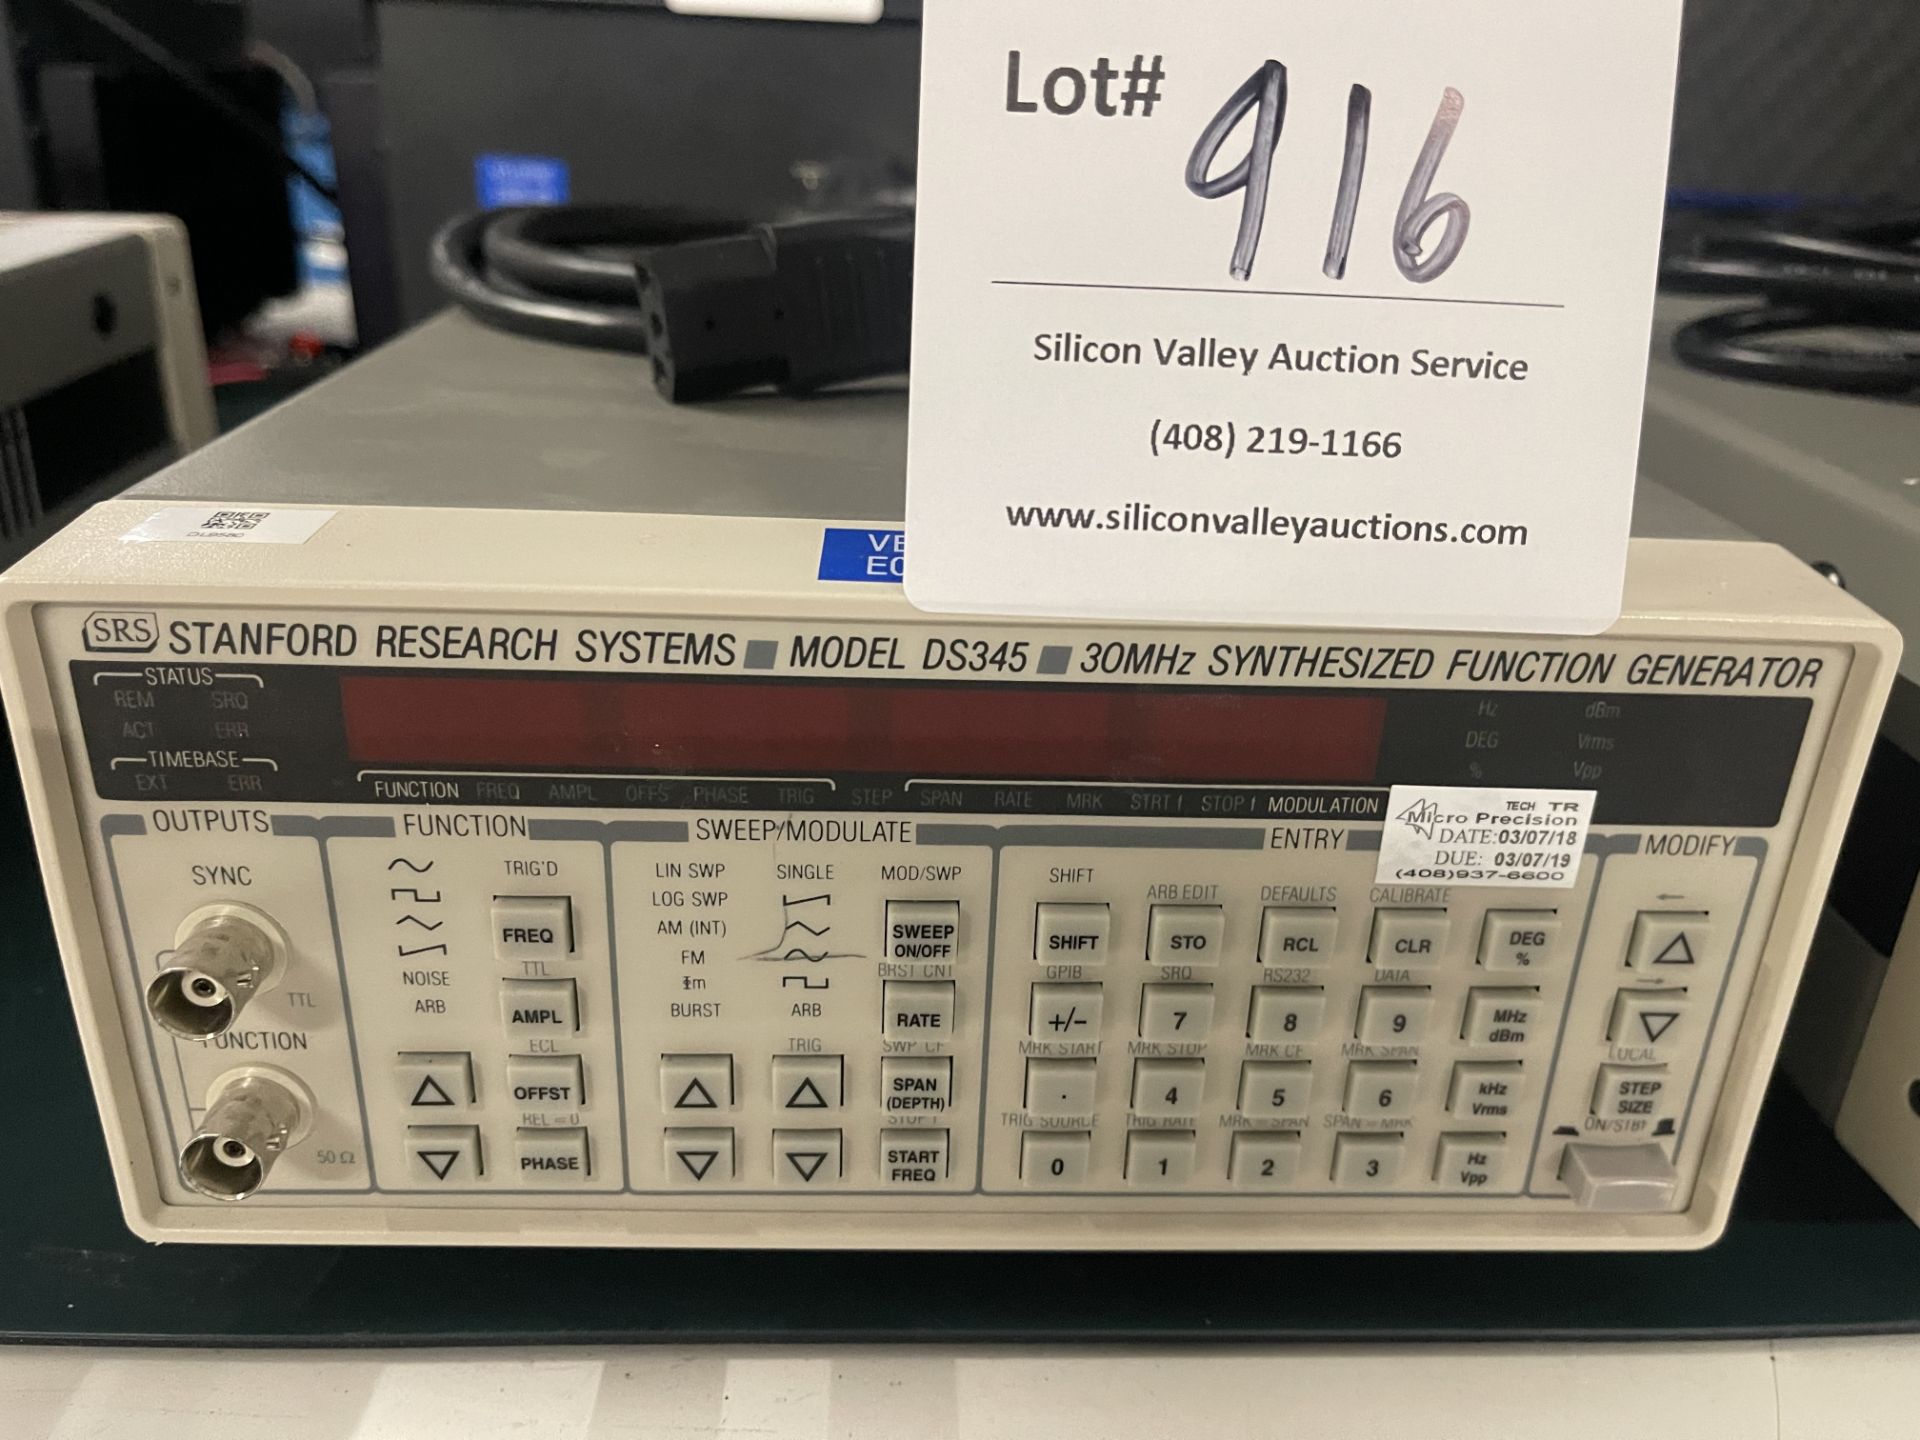 Stanford Research Systems Model DS345 Synthesized Function Generator